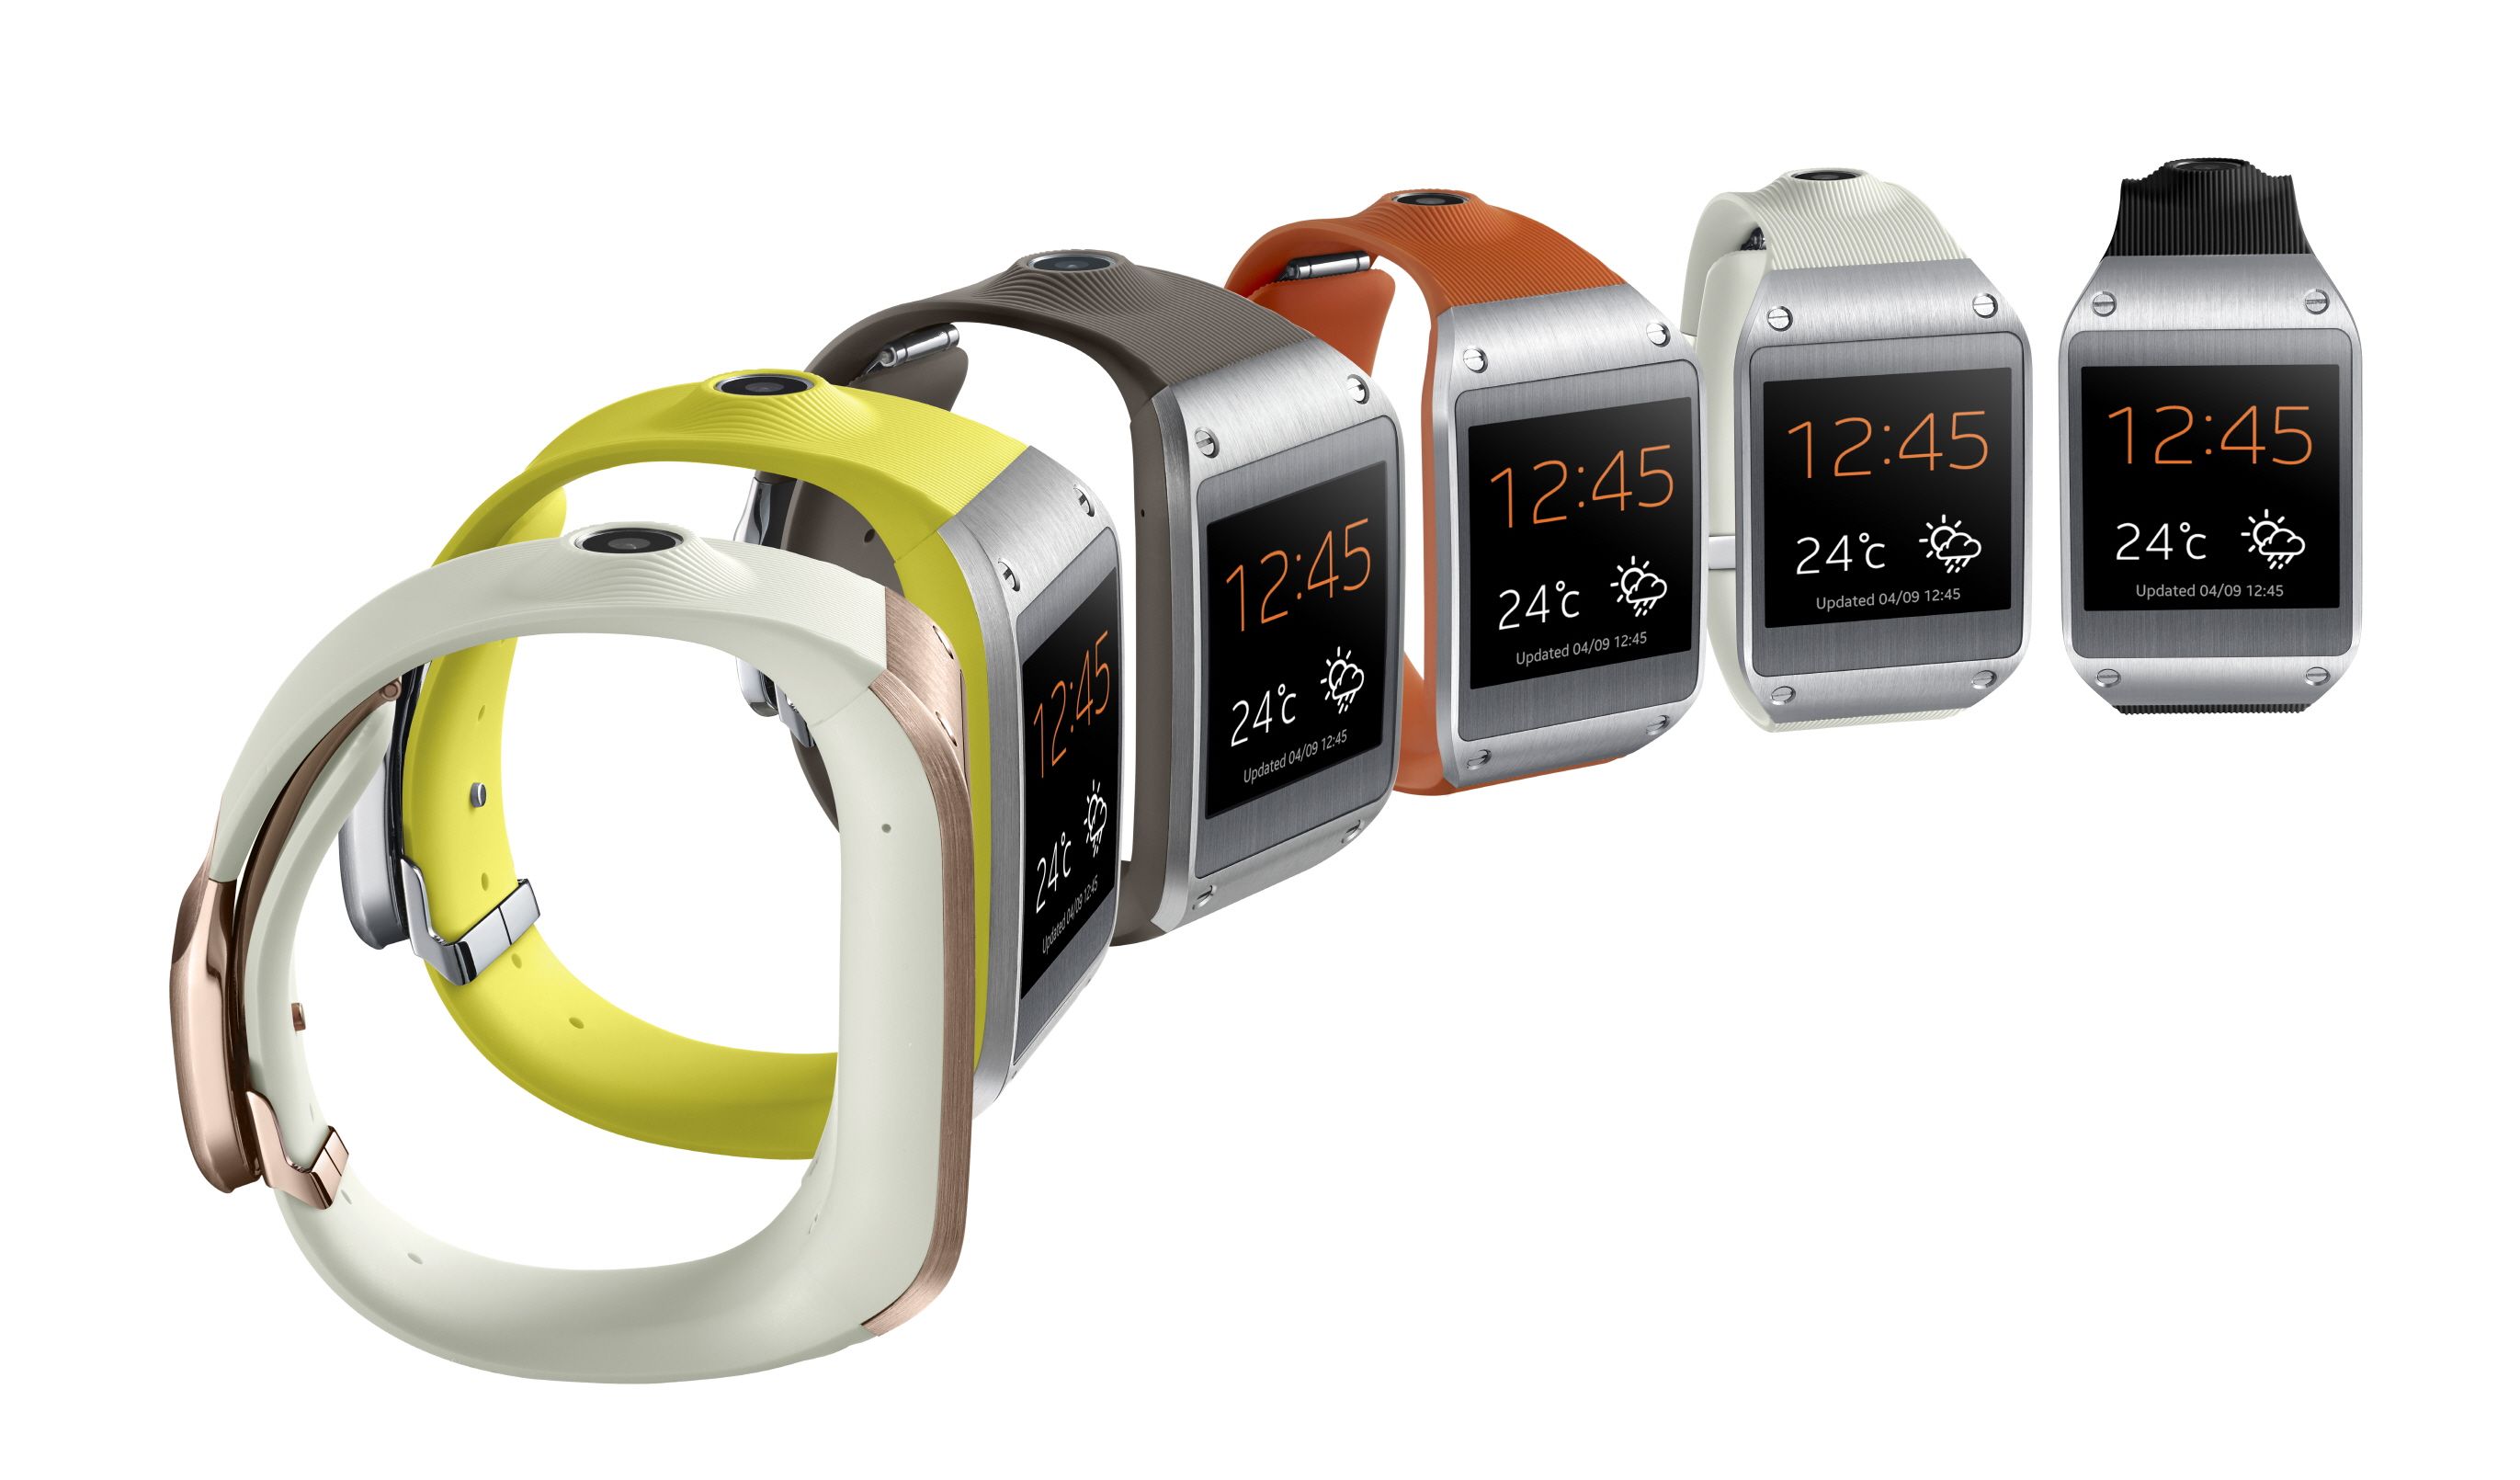 samsung galaxy gear unveiled a shot in the arm for the smartwatch market image 1